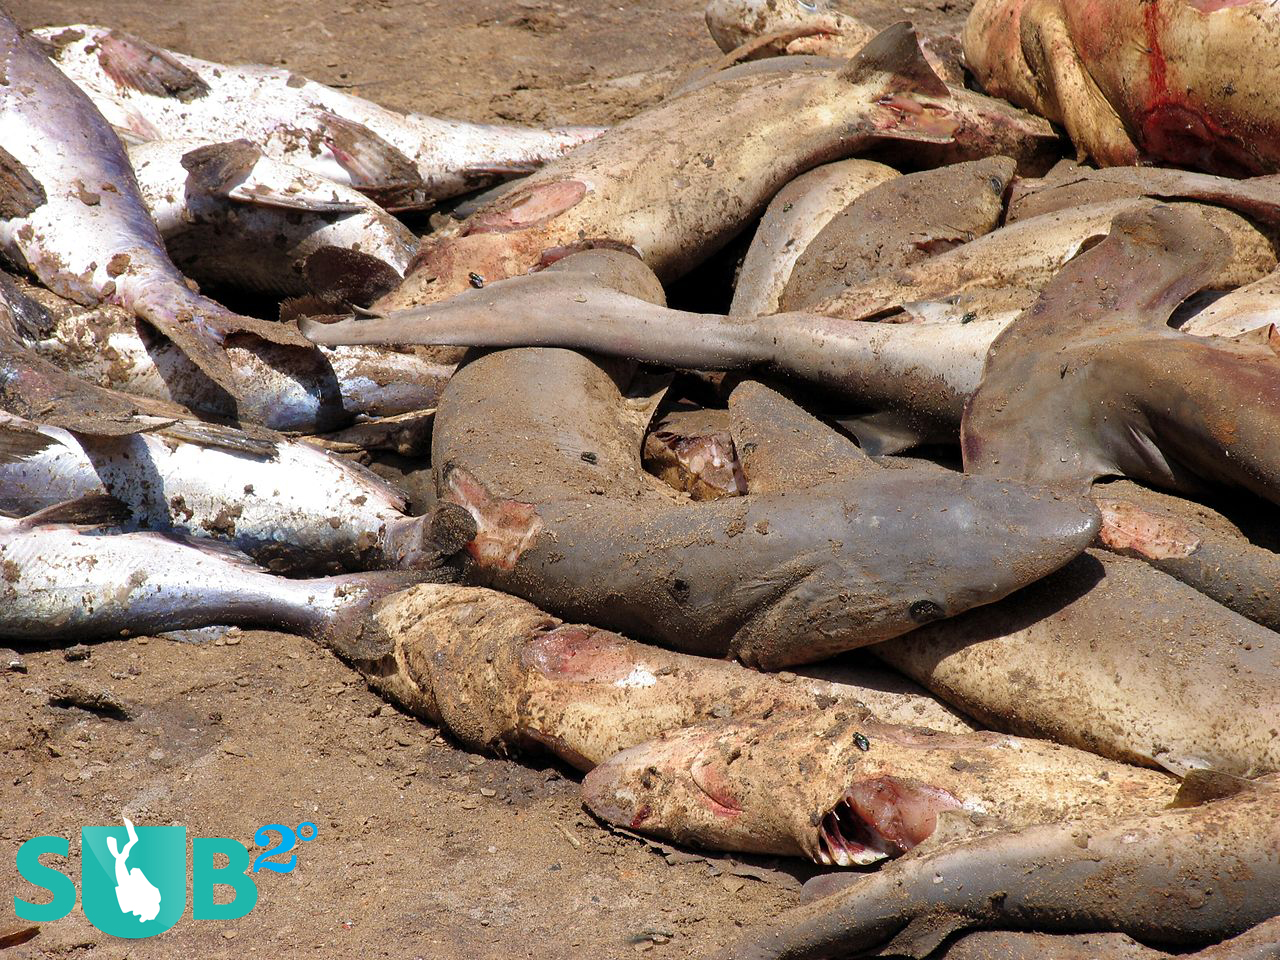 Dead sharks lie on the beach in Senegal, after having their fins cut off.